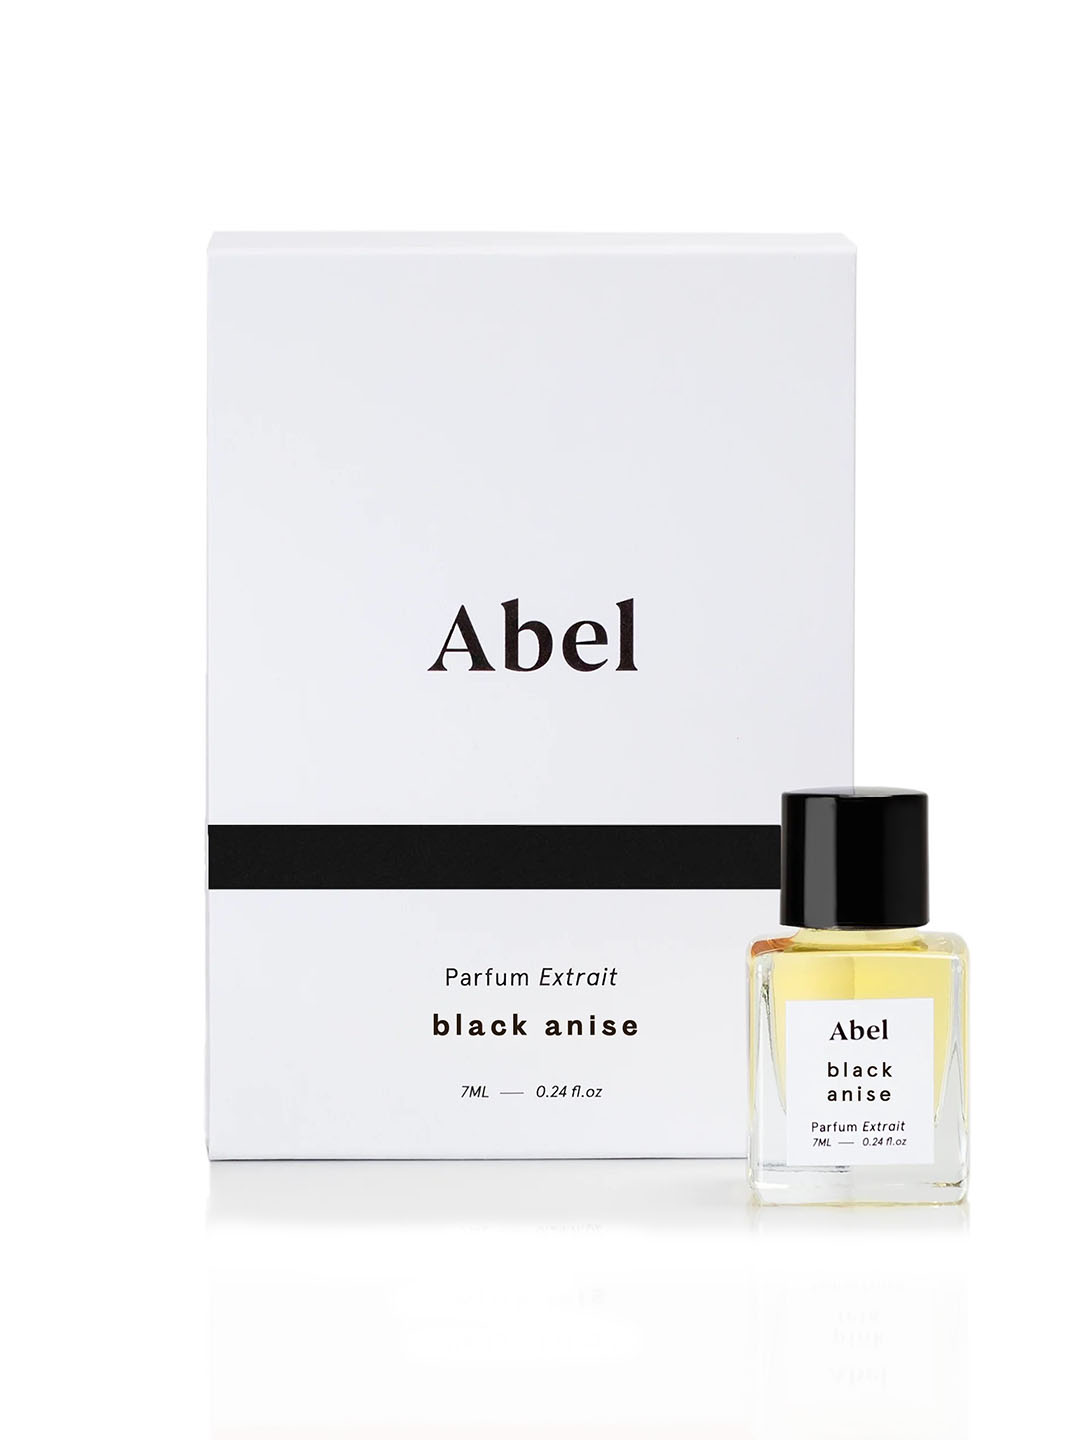 Abel Black Anise Parfum Extrait is a refreshing fragrance that combines the invigorating scent of black mint with essential oils for a long-lasting and uplifting parfum experience.